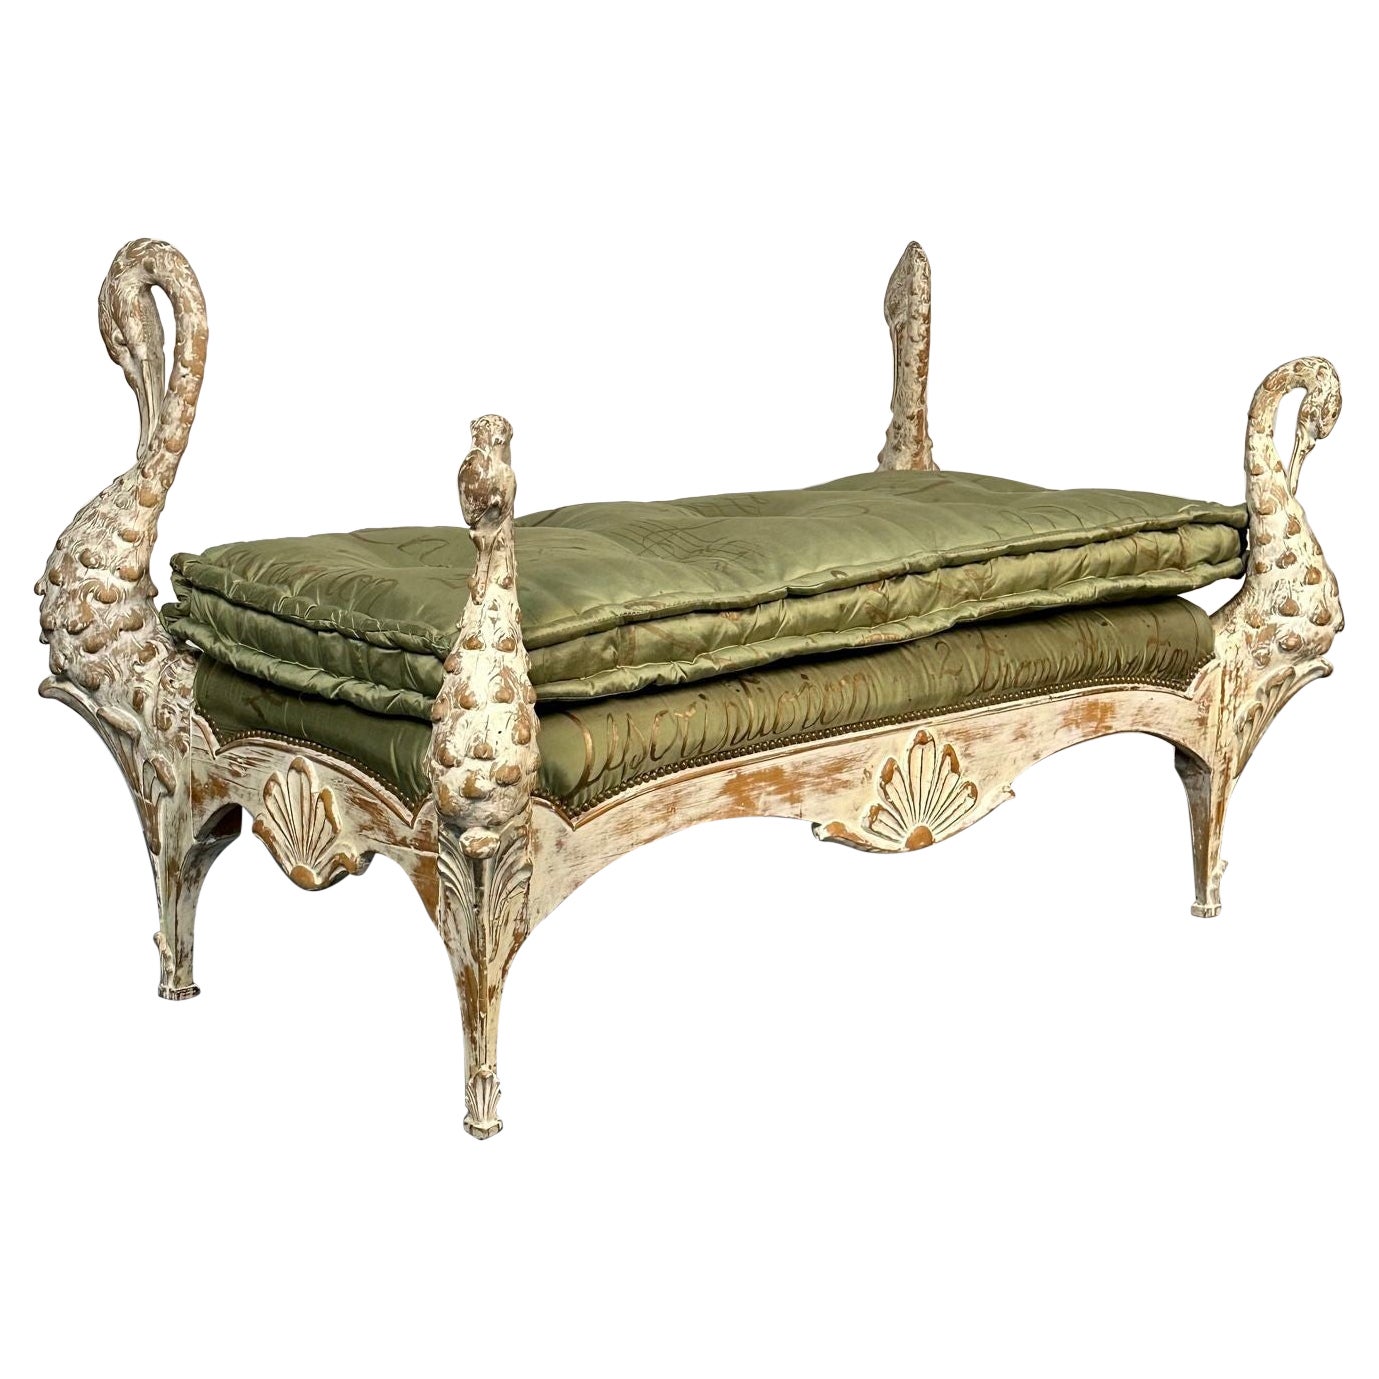 Maison Jansen Hollywood Regency Swan Bench / Daybed, Hand Carved, Distressed